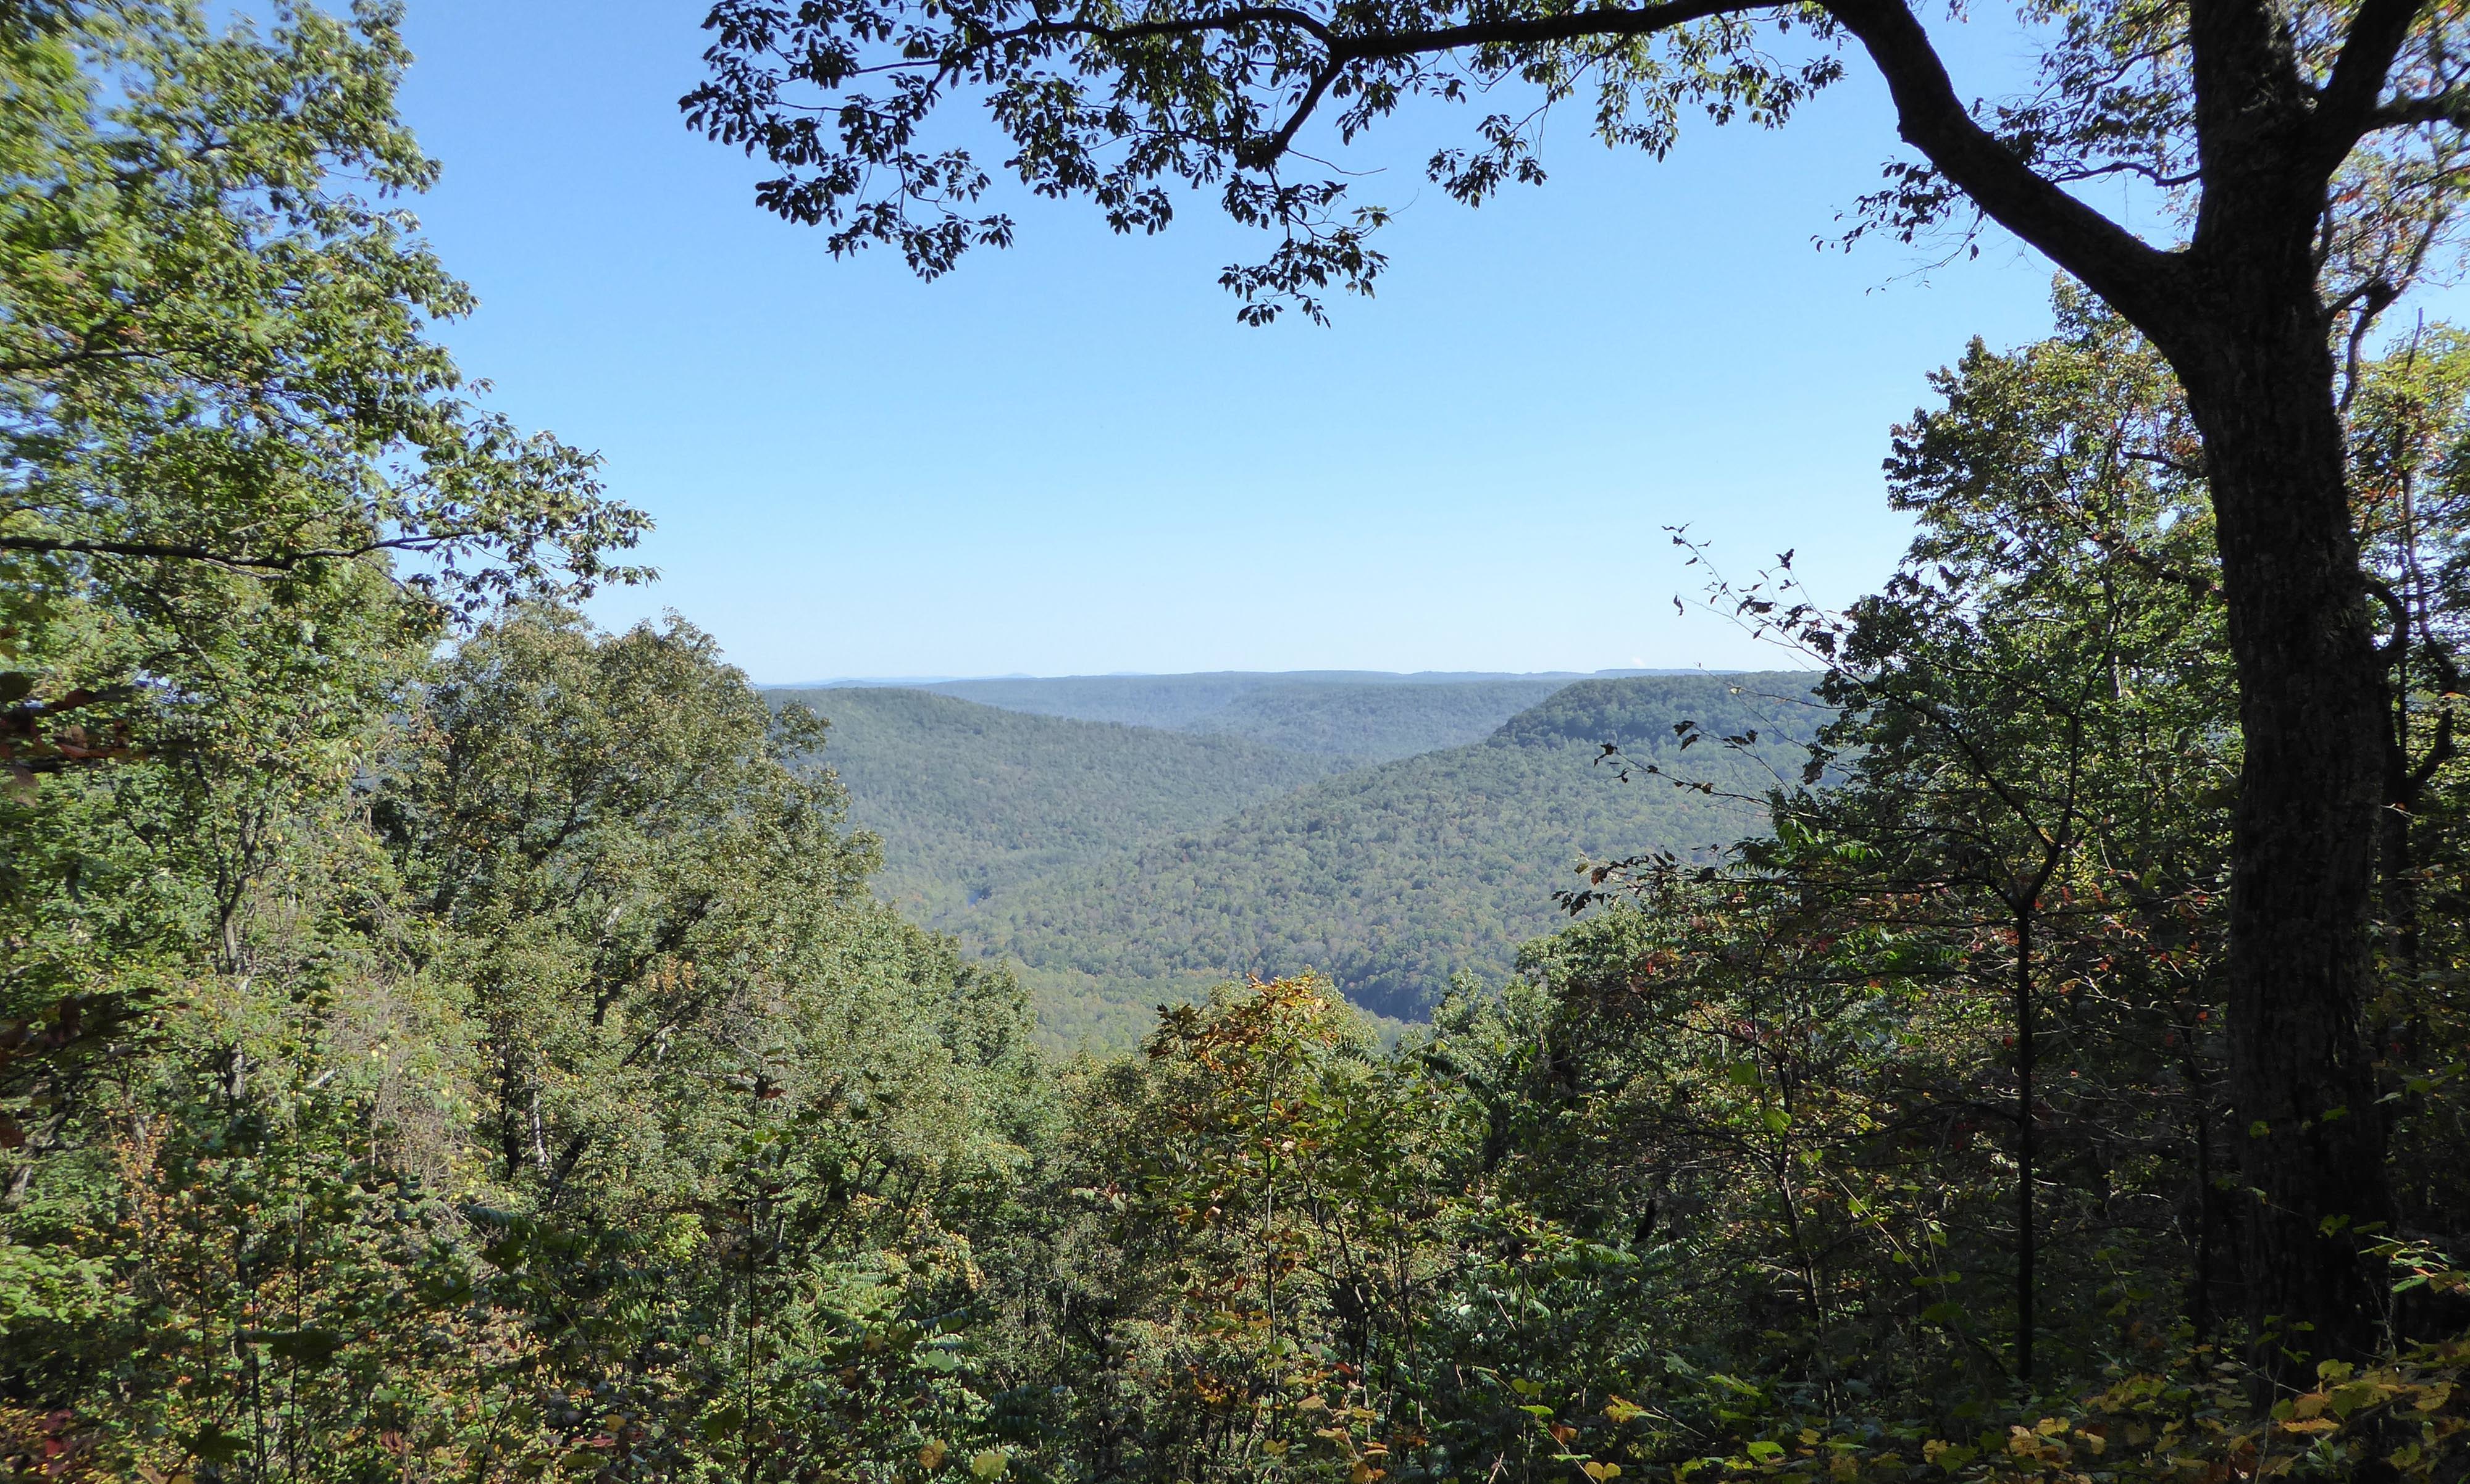 Trees frame the view of a forested valley below.